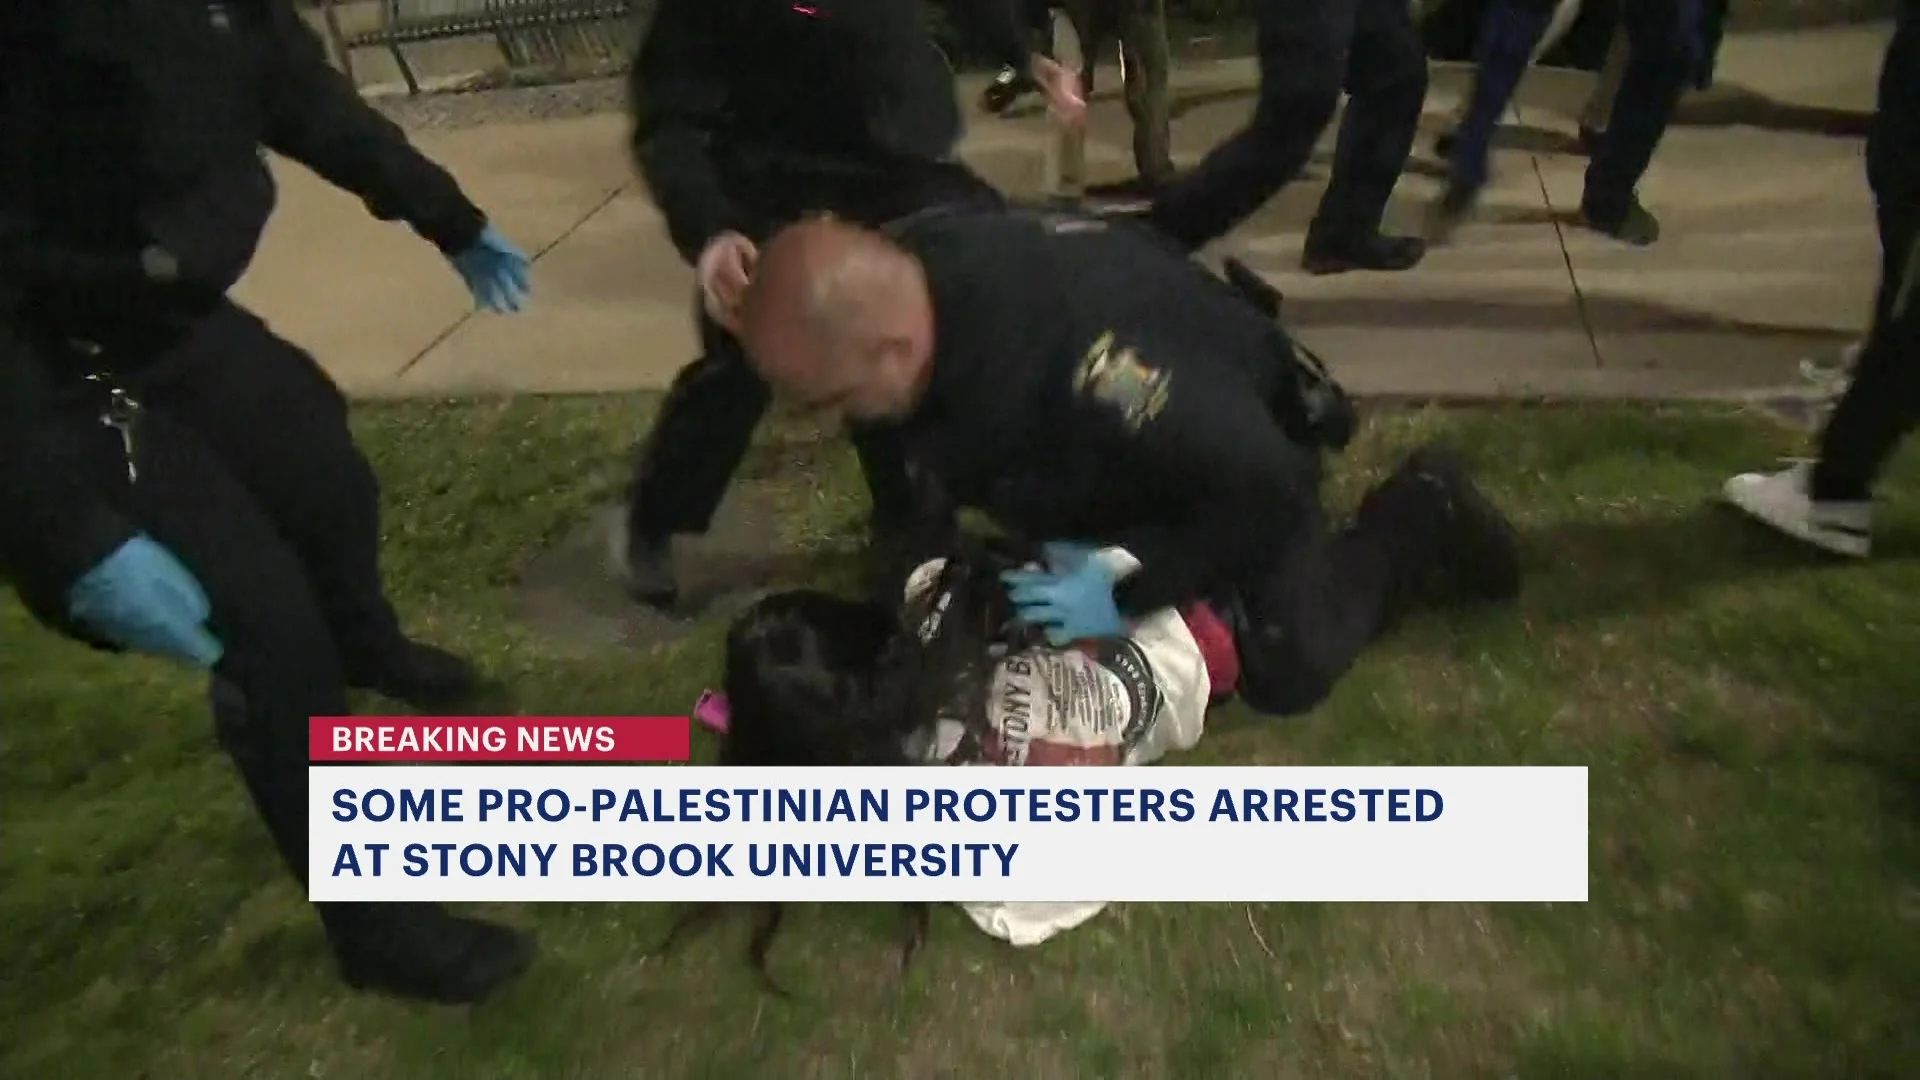 Several pro-Palestinian protesters arrested at Stony Brook University